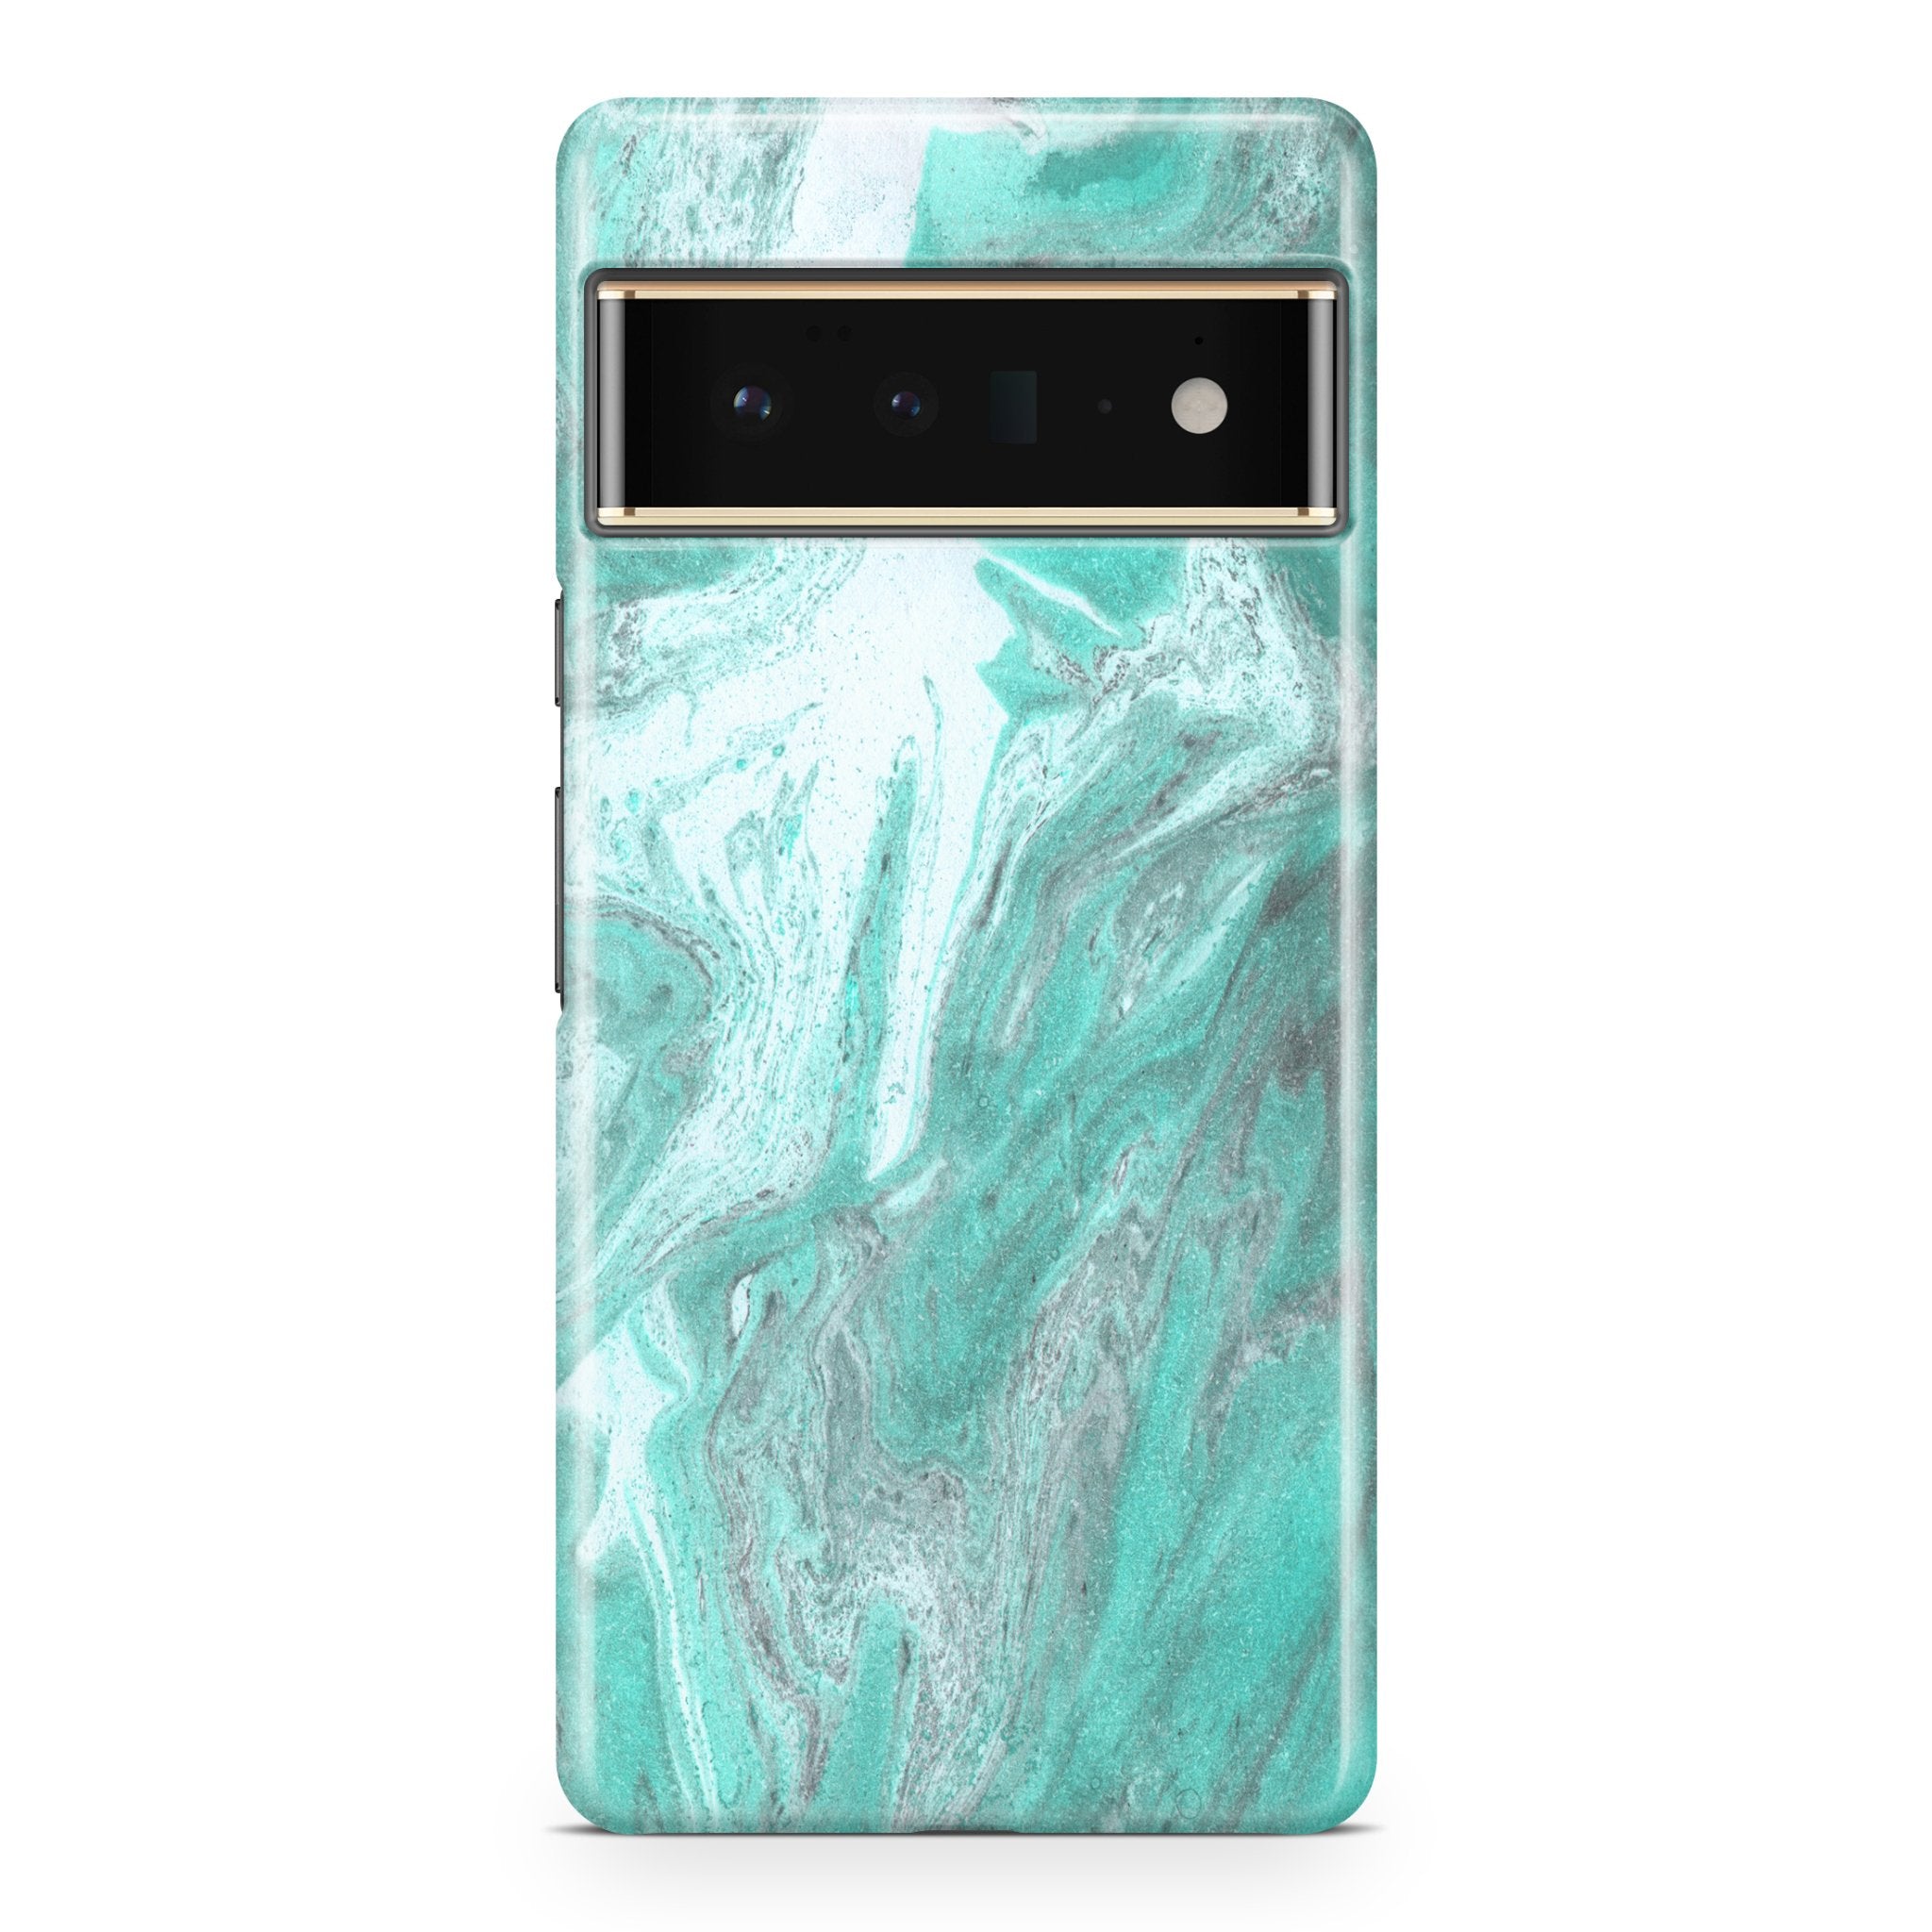 Aqua Green Marble - Google phone case designs by CaseSwagger